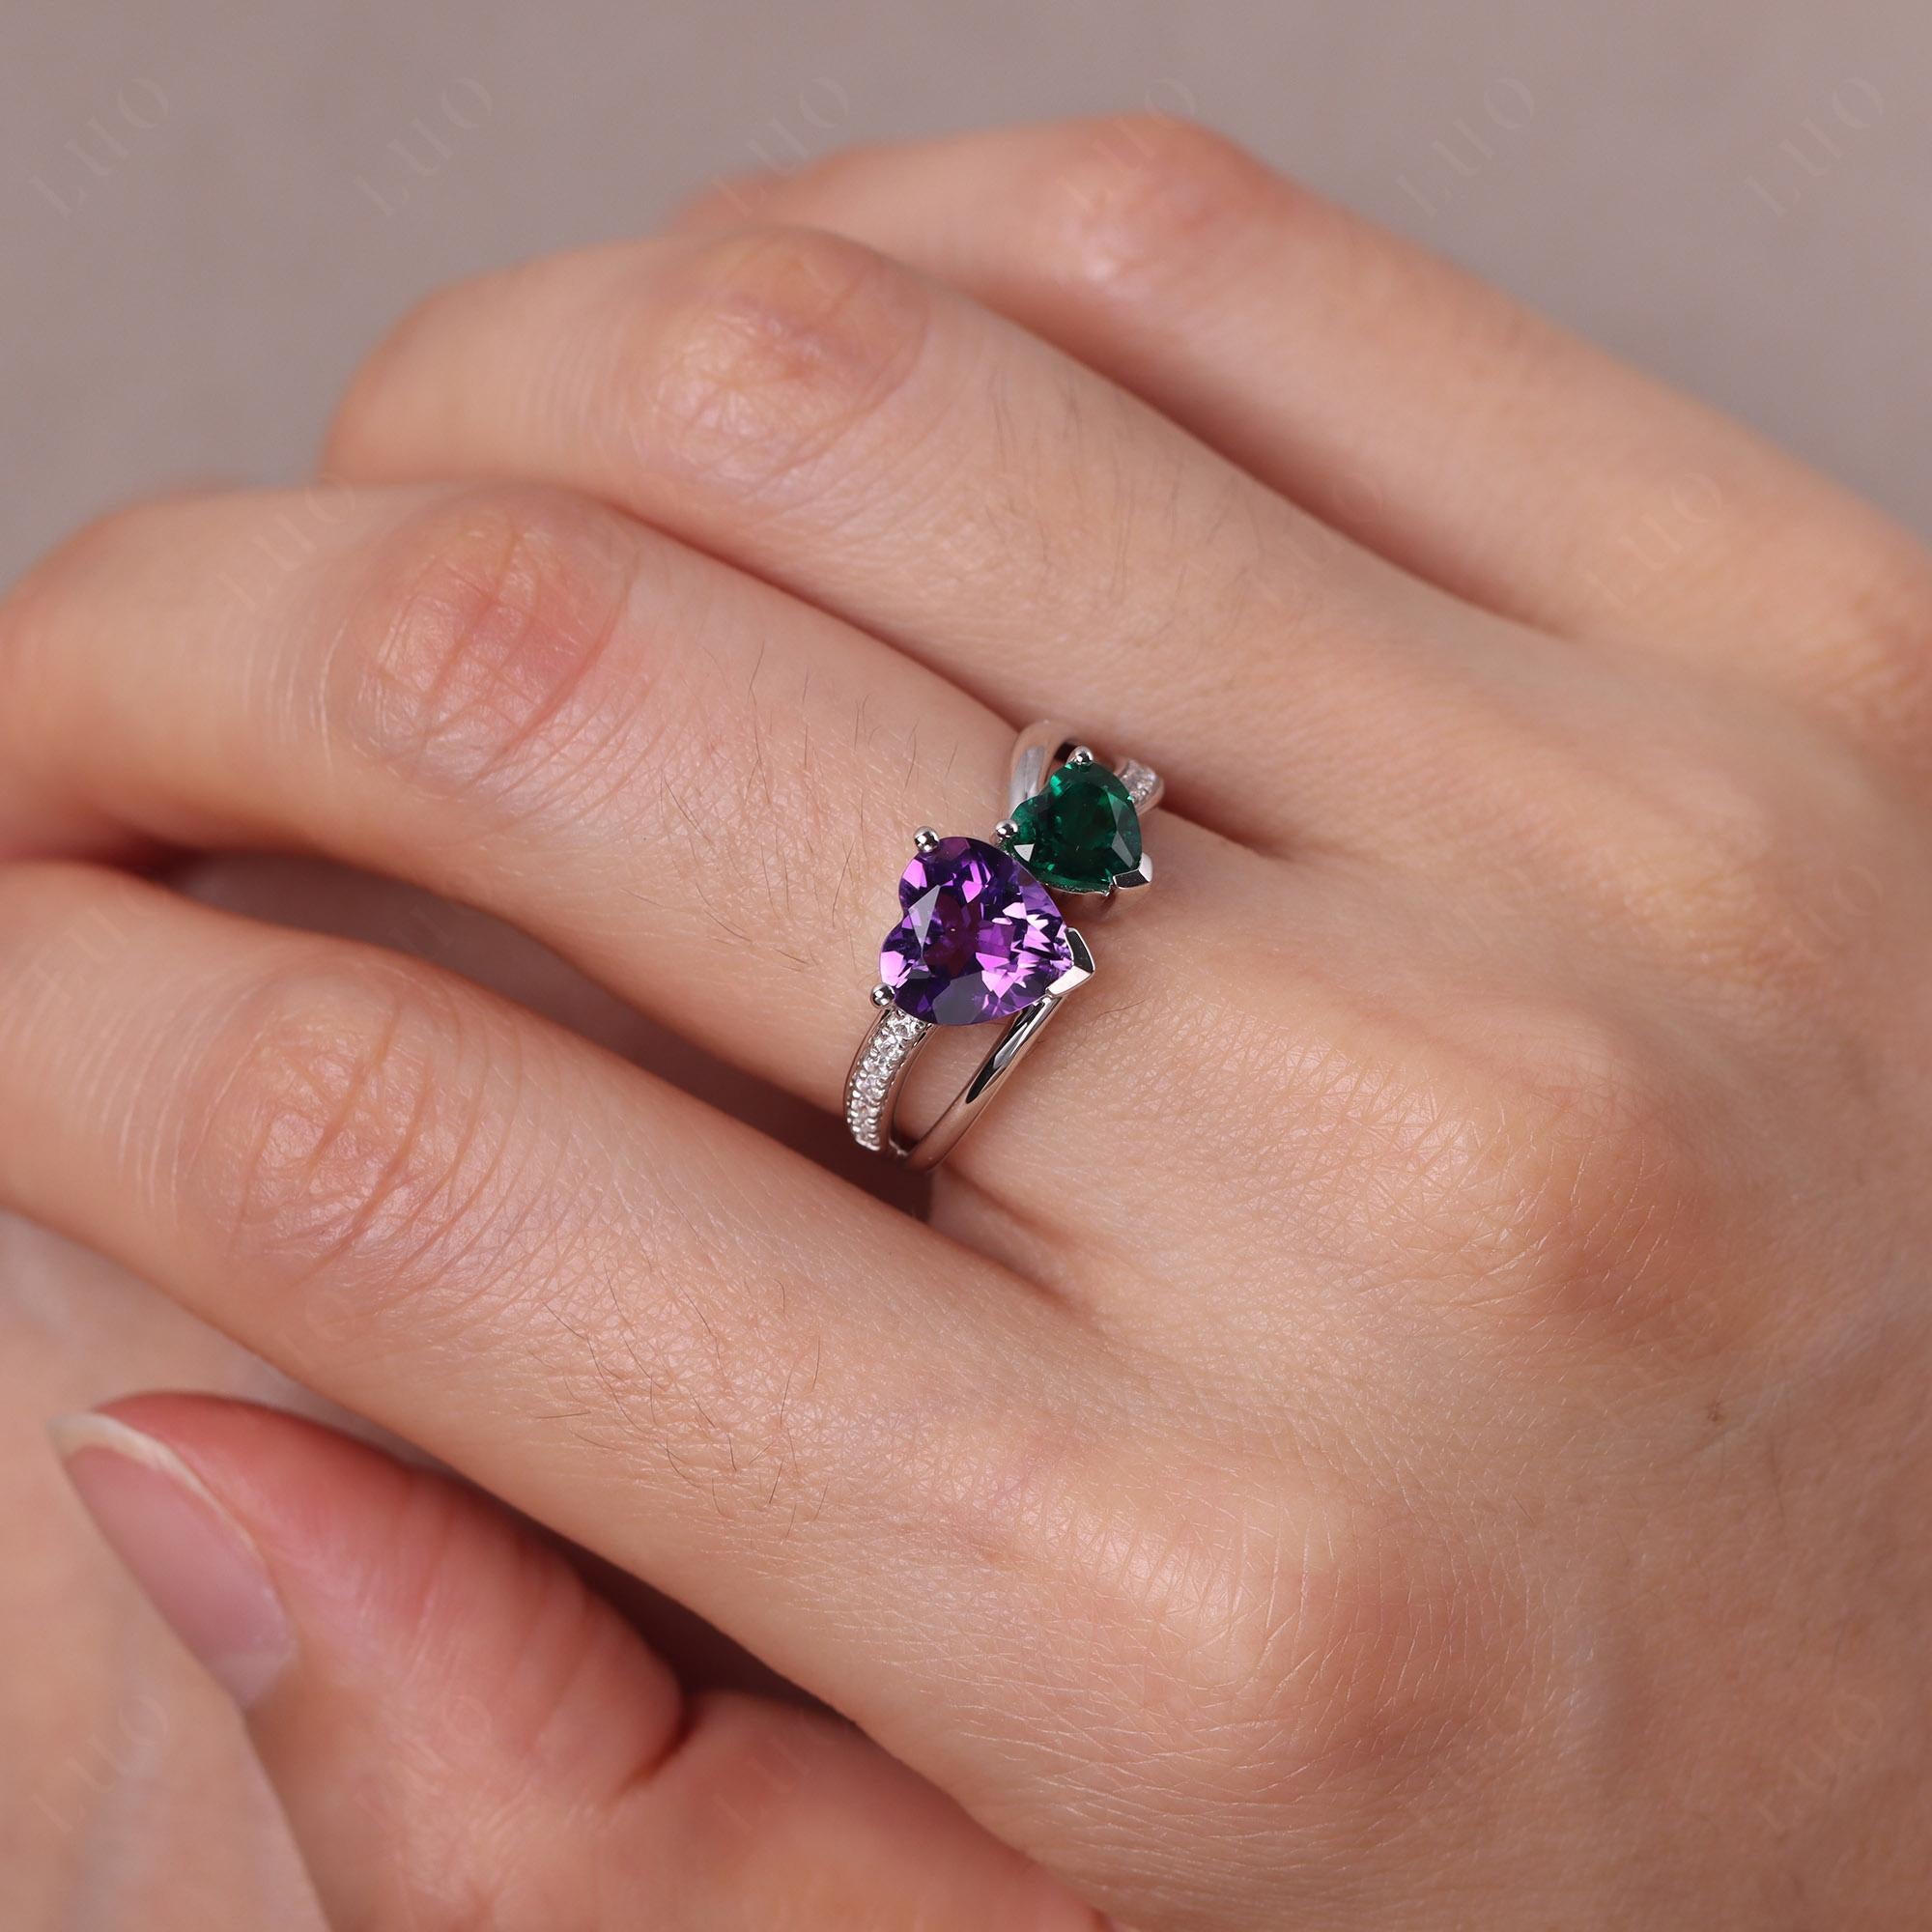 Heart Shaped Amethyst and Emerald Toi Et Moi Ring - LUO Jewelry